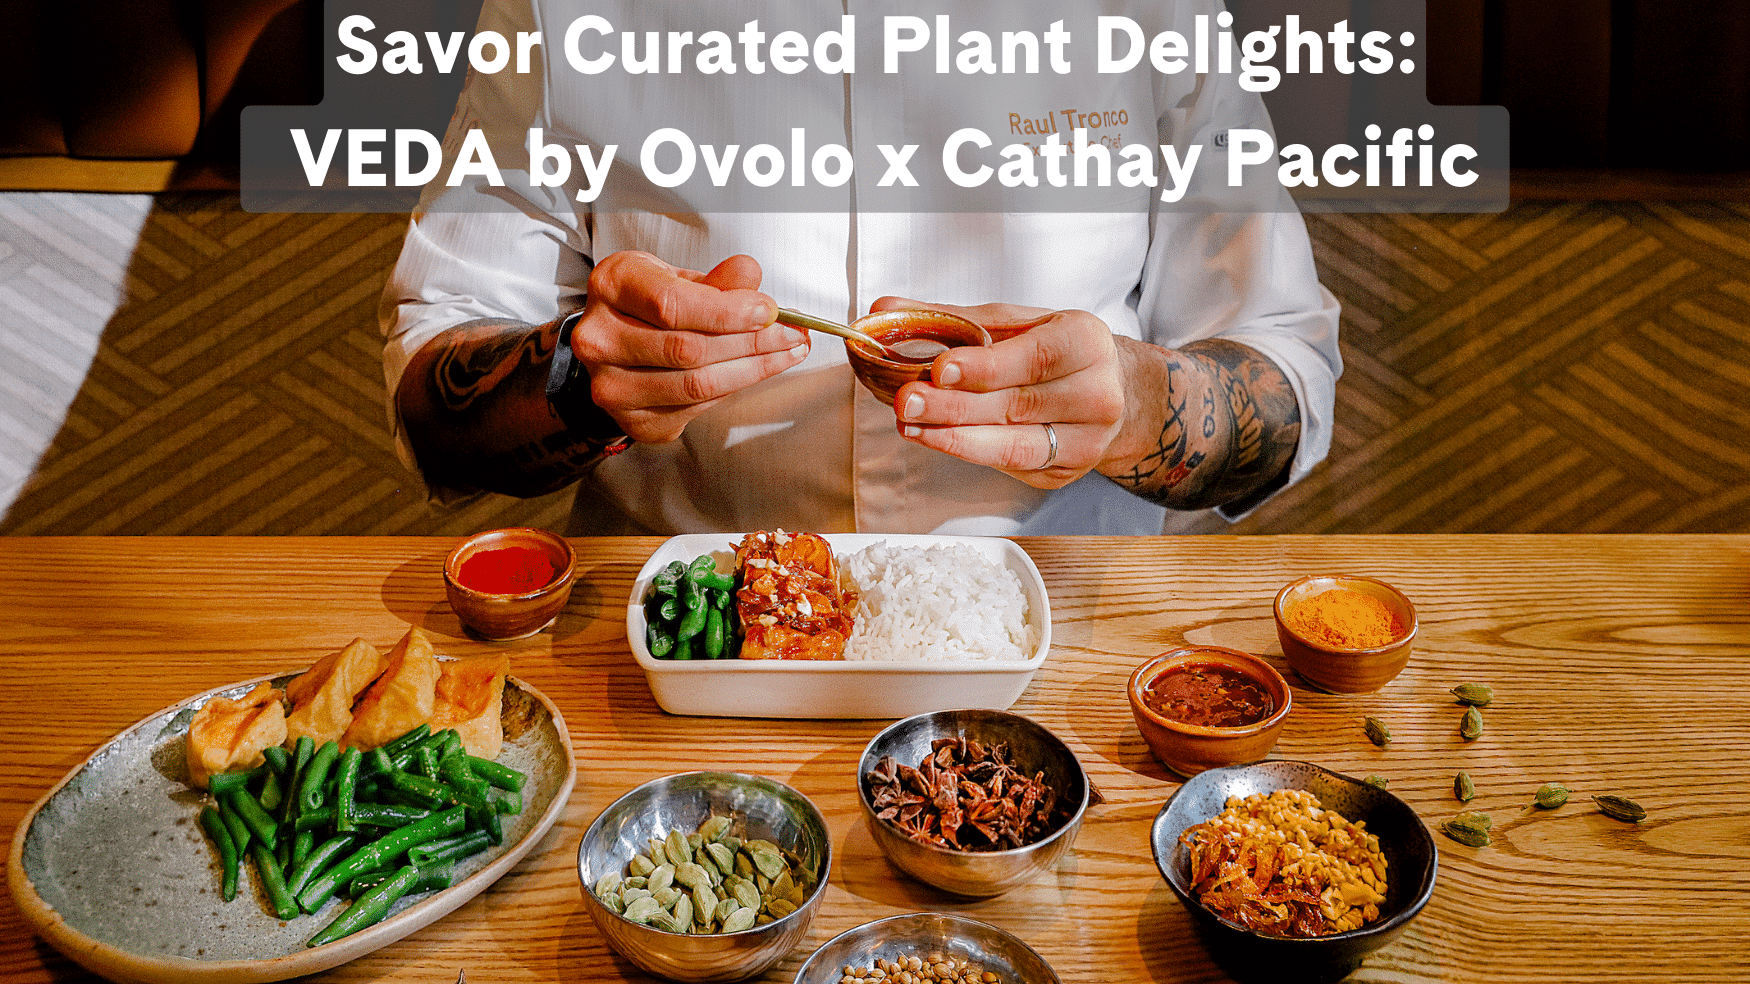 Savor Curated Plant Delights: VEDA by Ovolo x Cathay Pacific